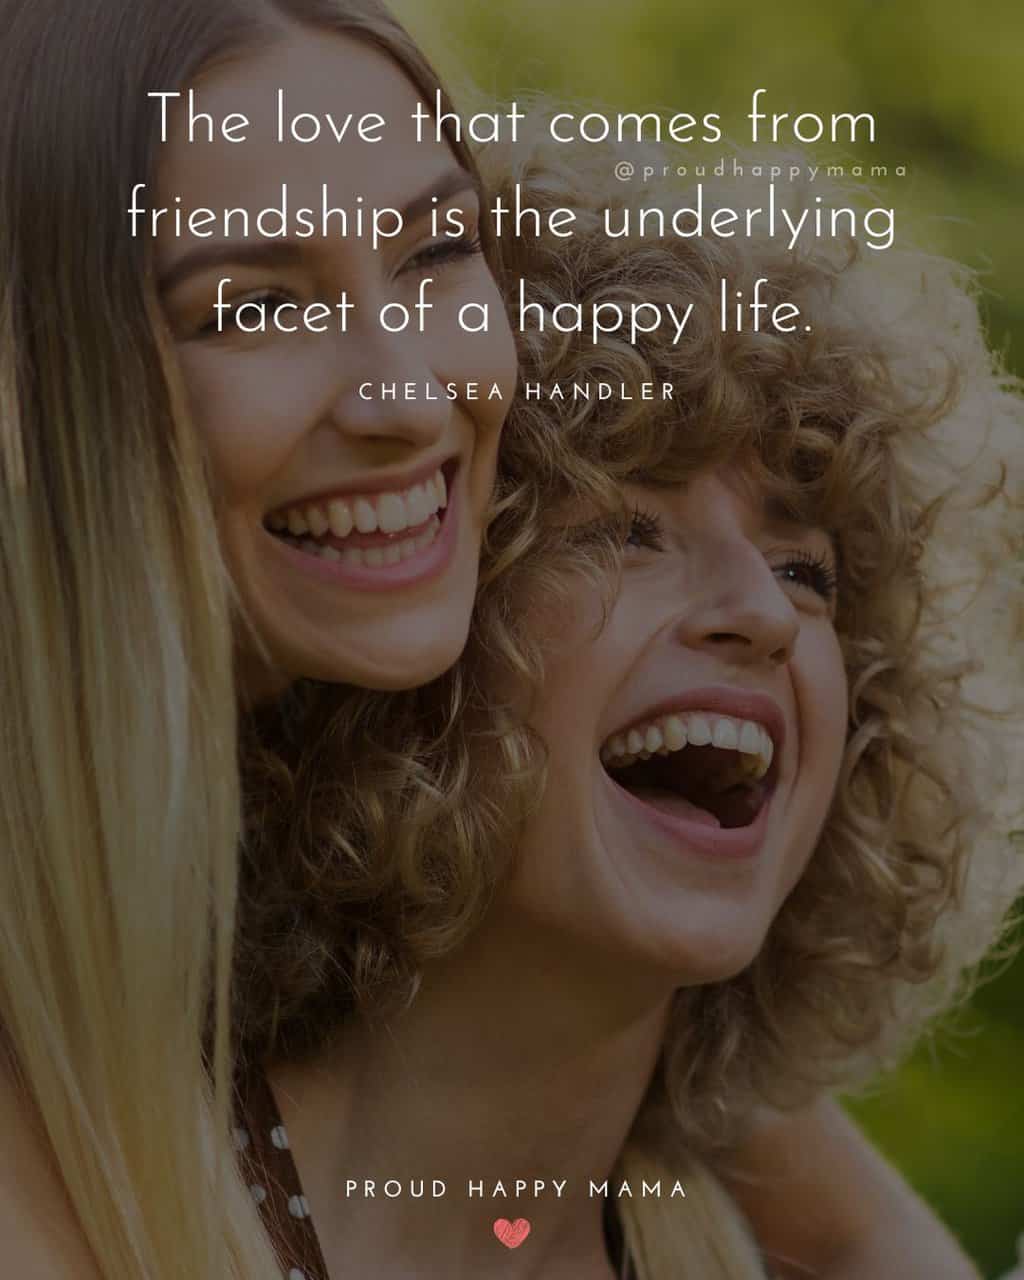 two friends laughing with meaningful friendship quote overlay the love that comes from friendship is the underlying facet of a happy life.